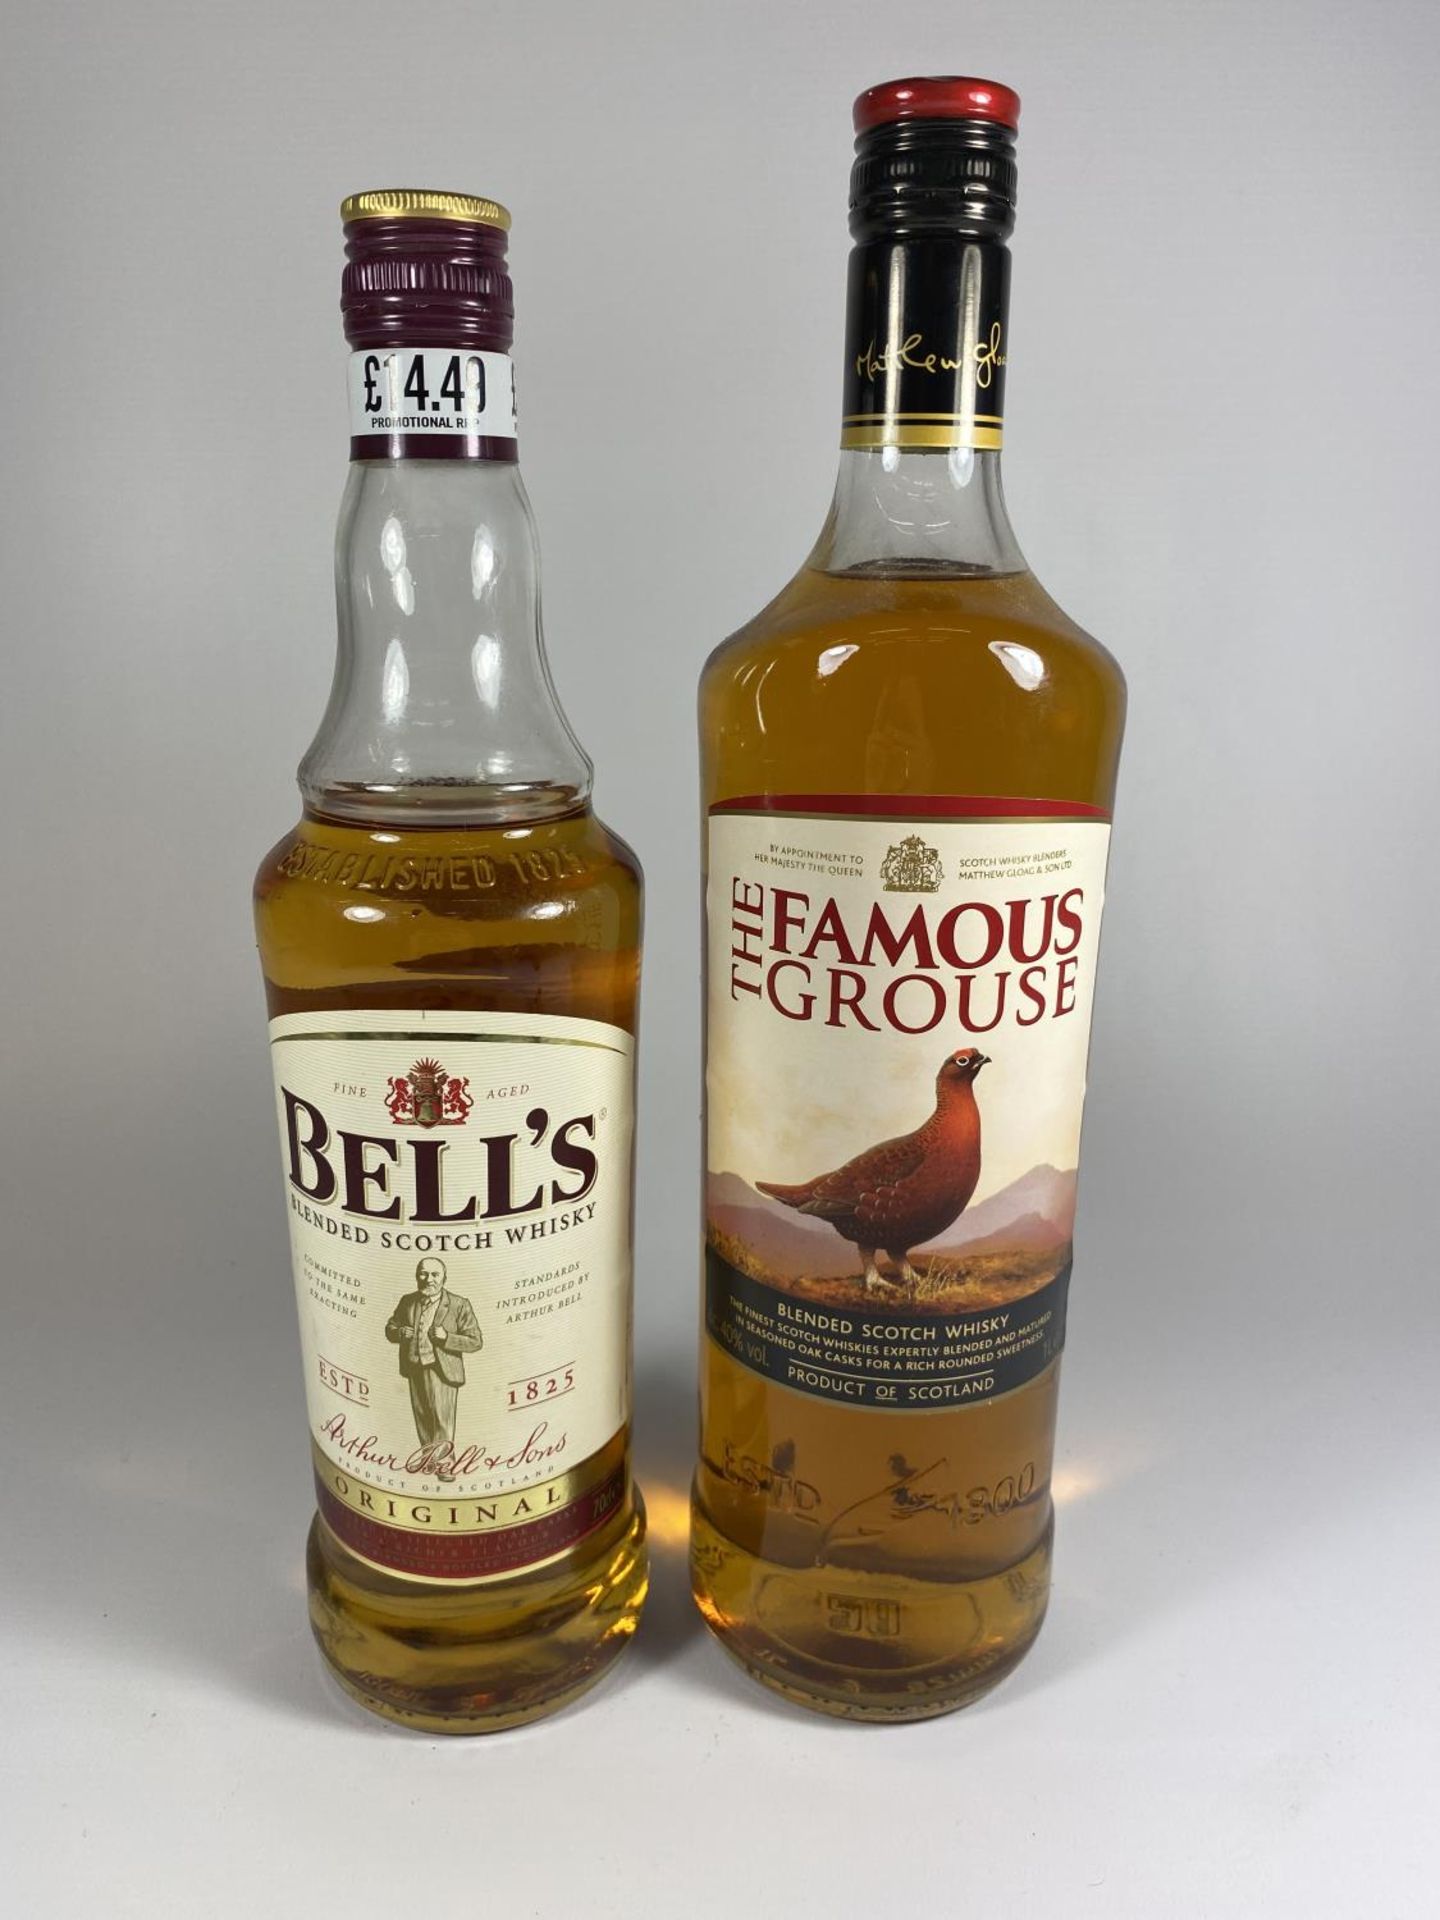 2 X BOTTLES - BELLS & THE FAMOUS GROUSE SCOTCH WHISKIES